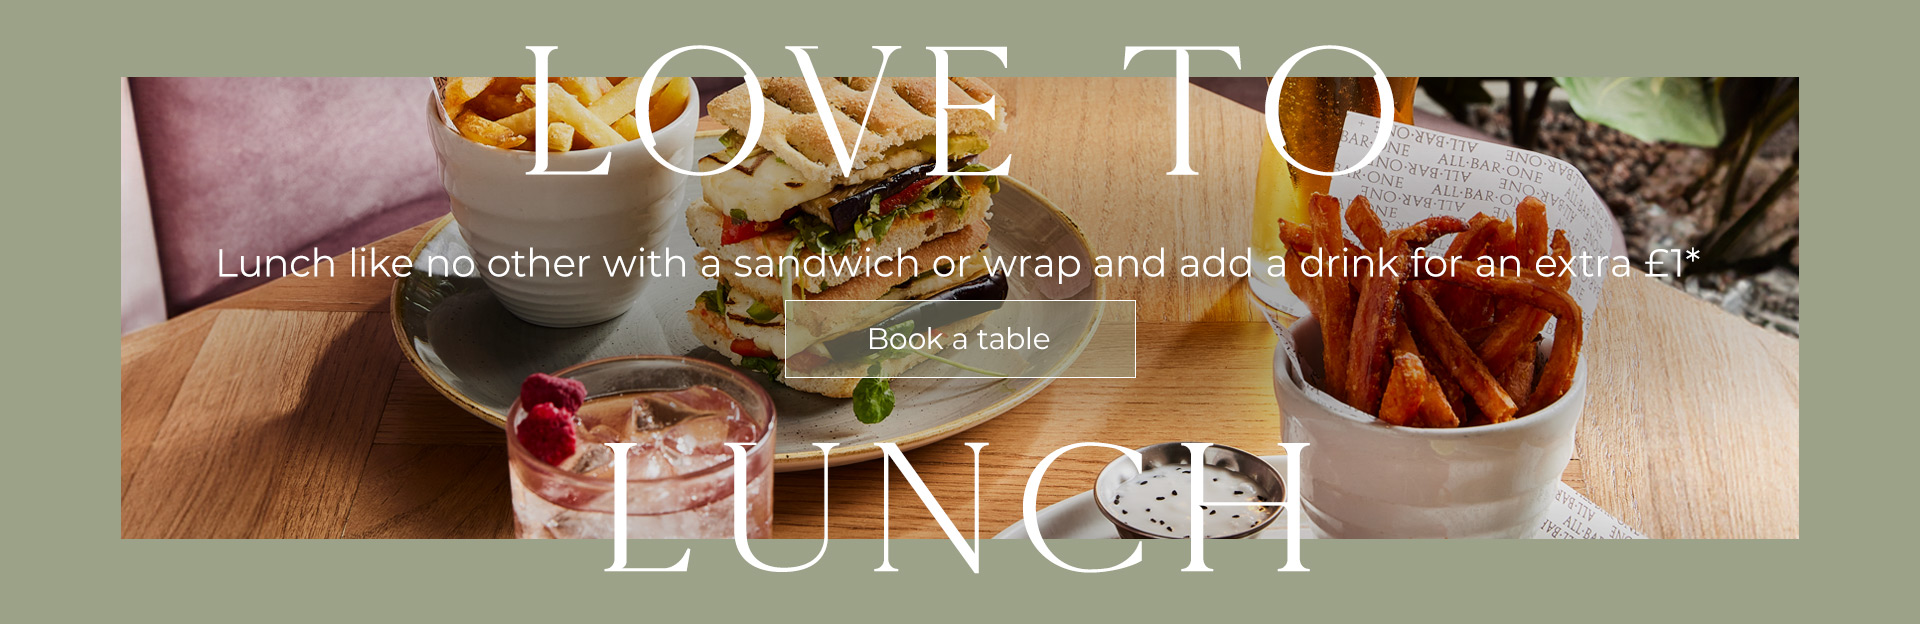 Lunch Offer at All Bar One Guildford